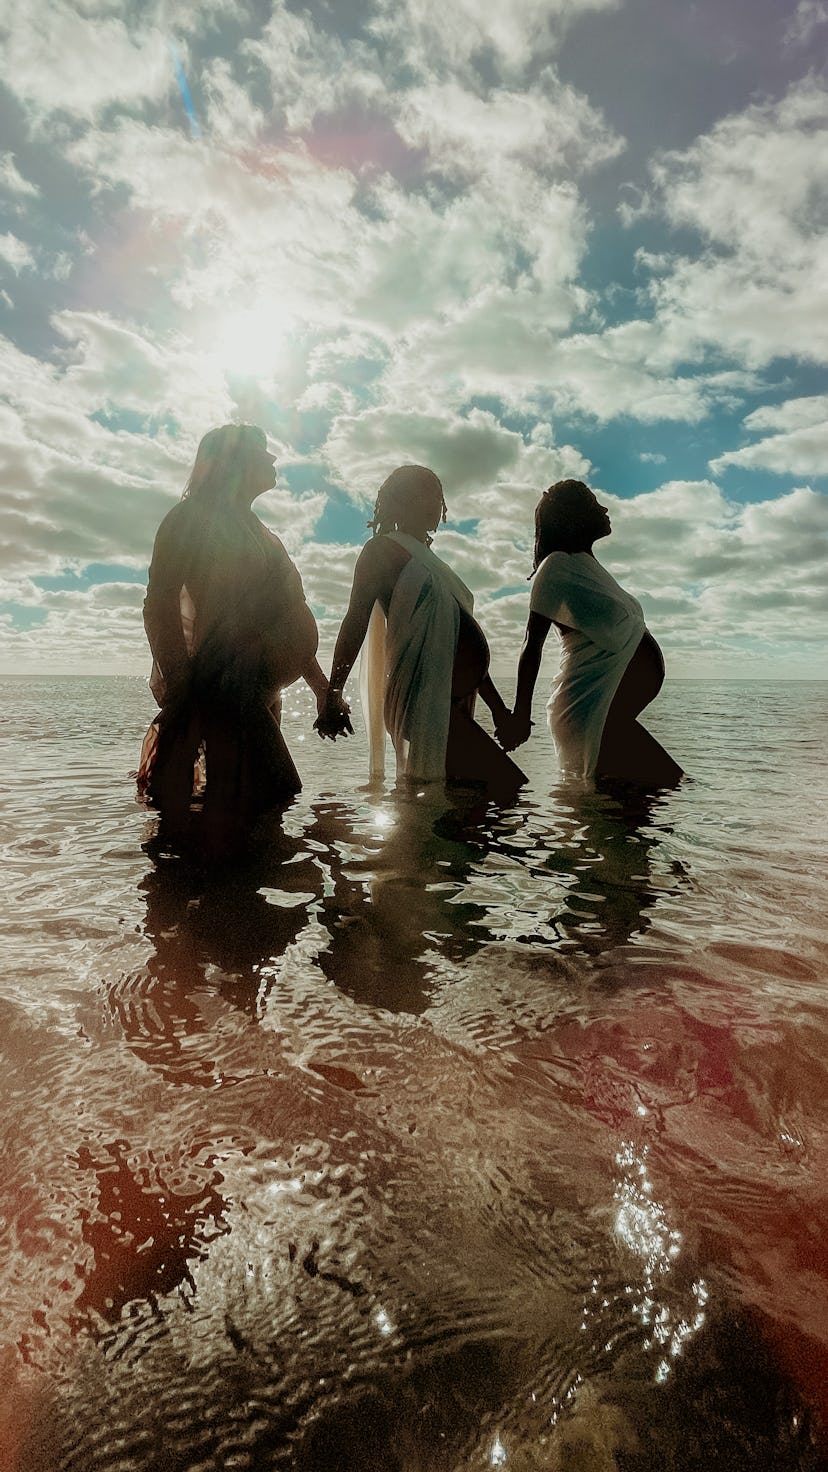 Three pregnant women in the water. Apple partnered with female photographers for an International Wo...